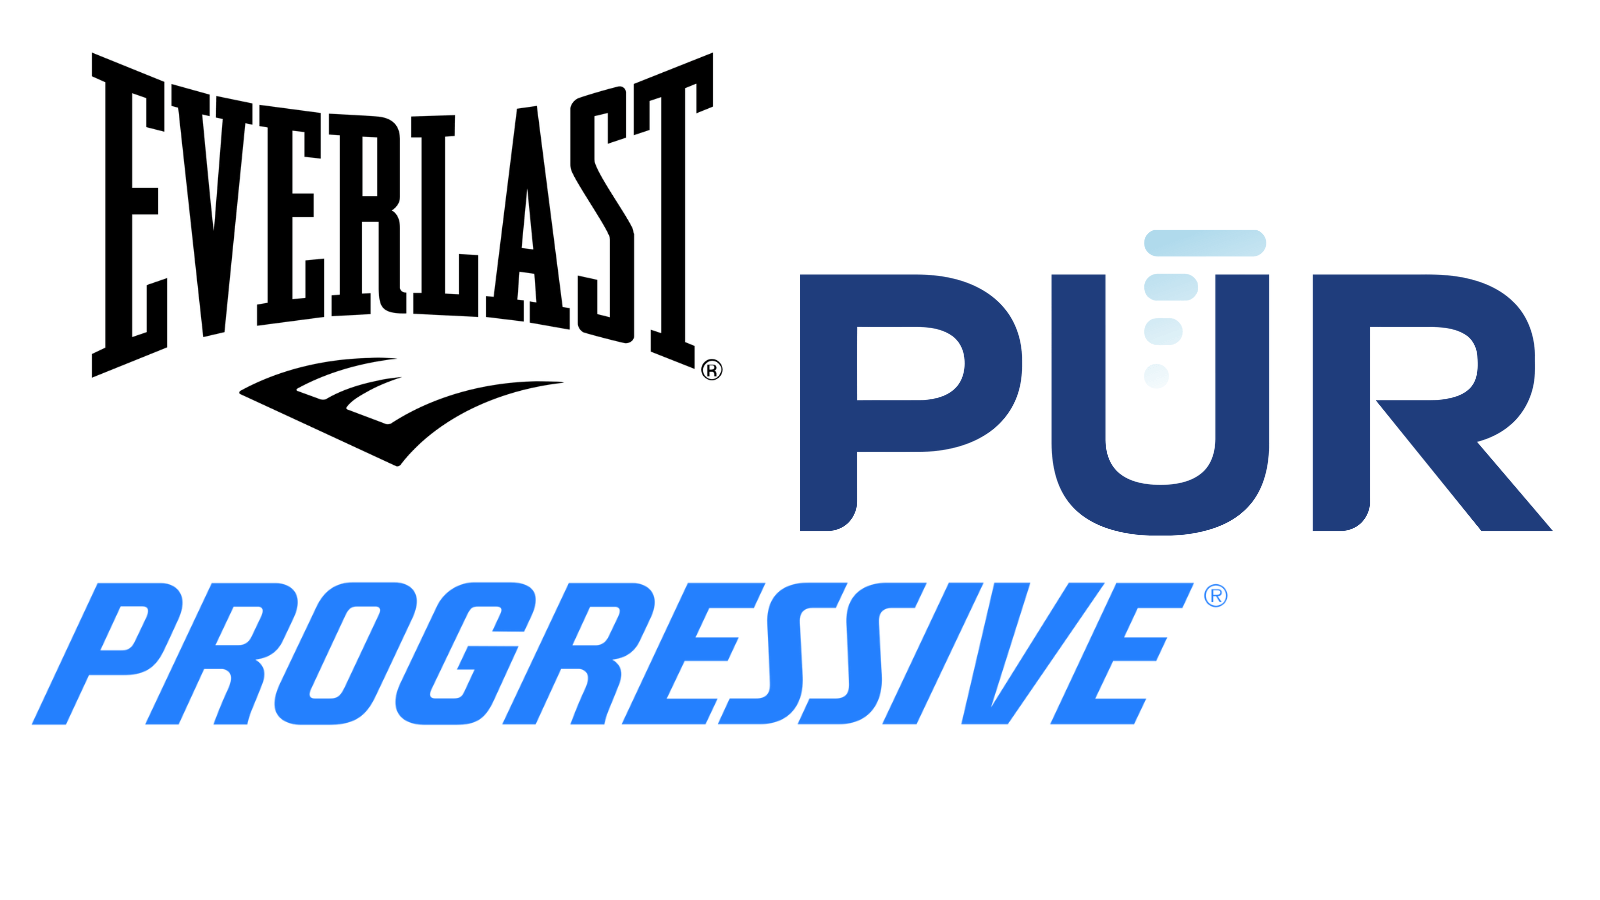 The wordmarks for Everlast, Progressive, and Pur